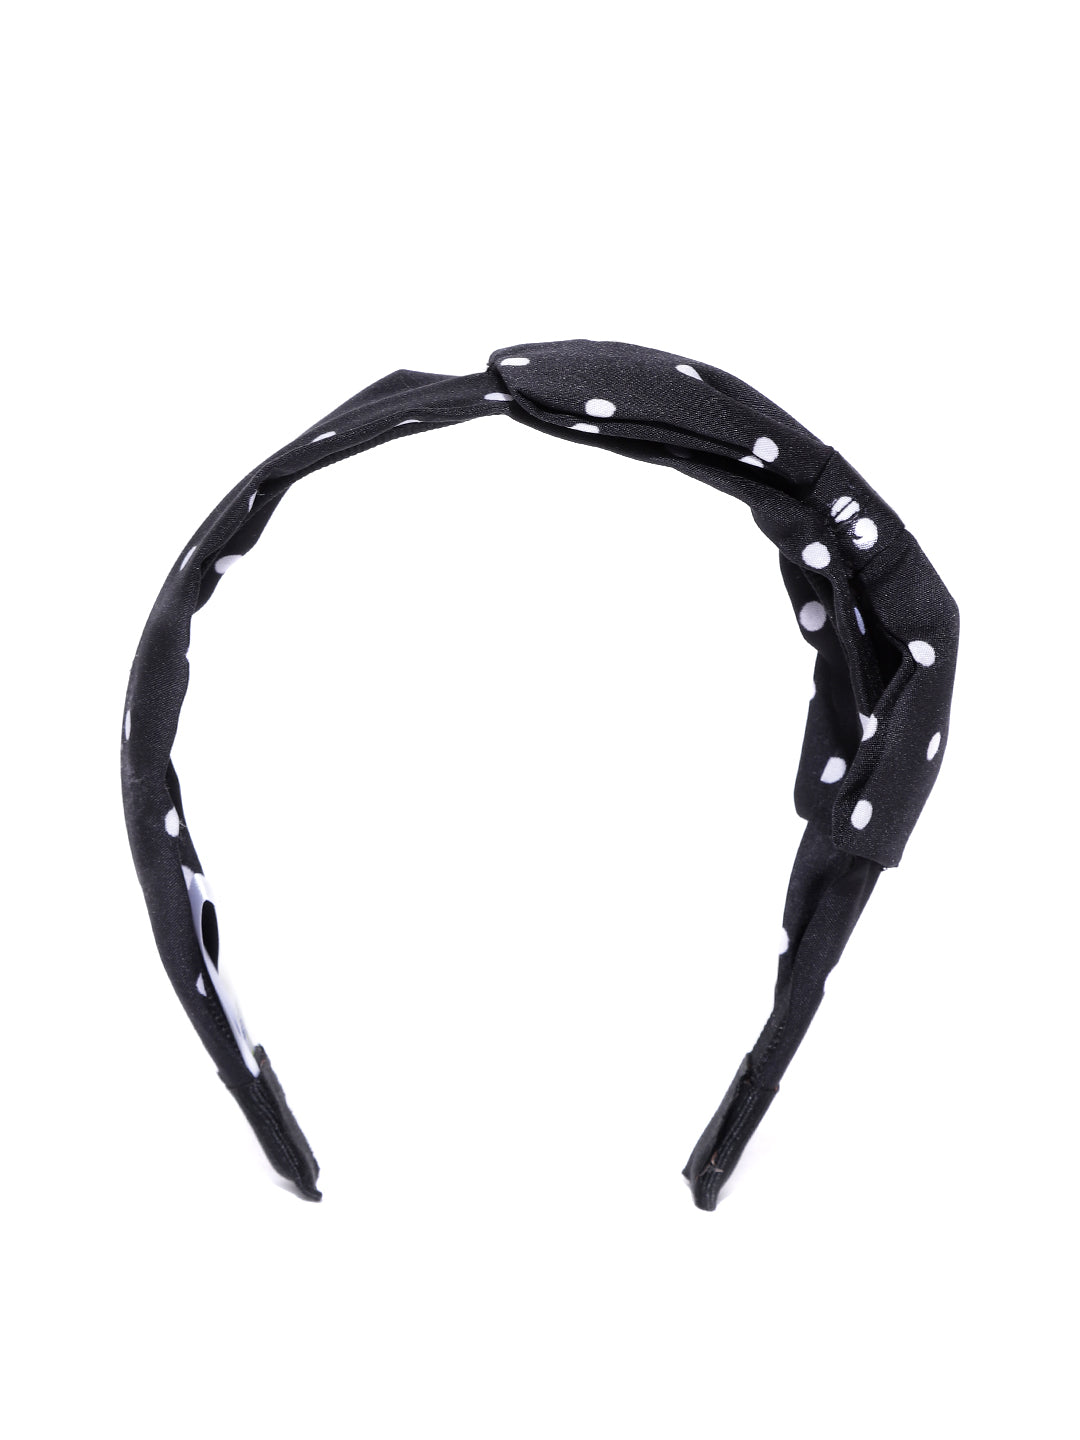 Blueberry white dotted printed black hairband